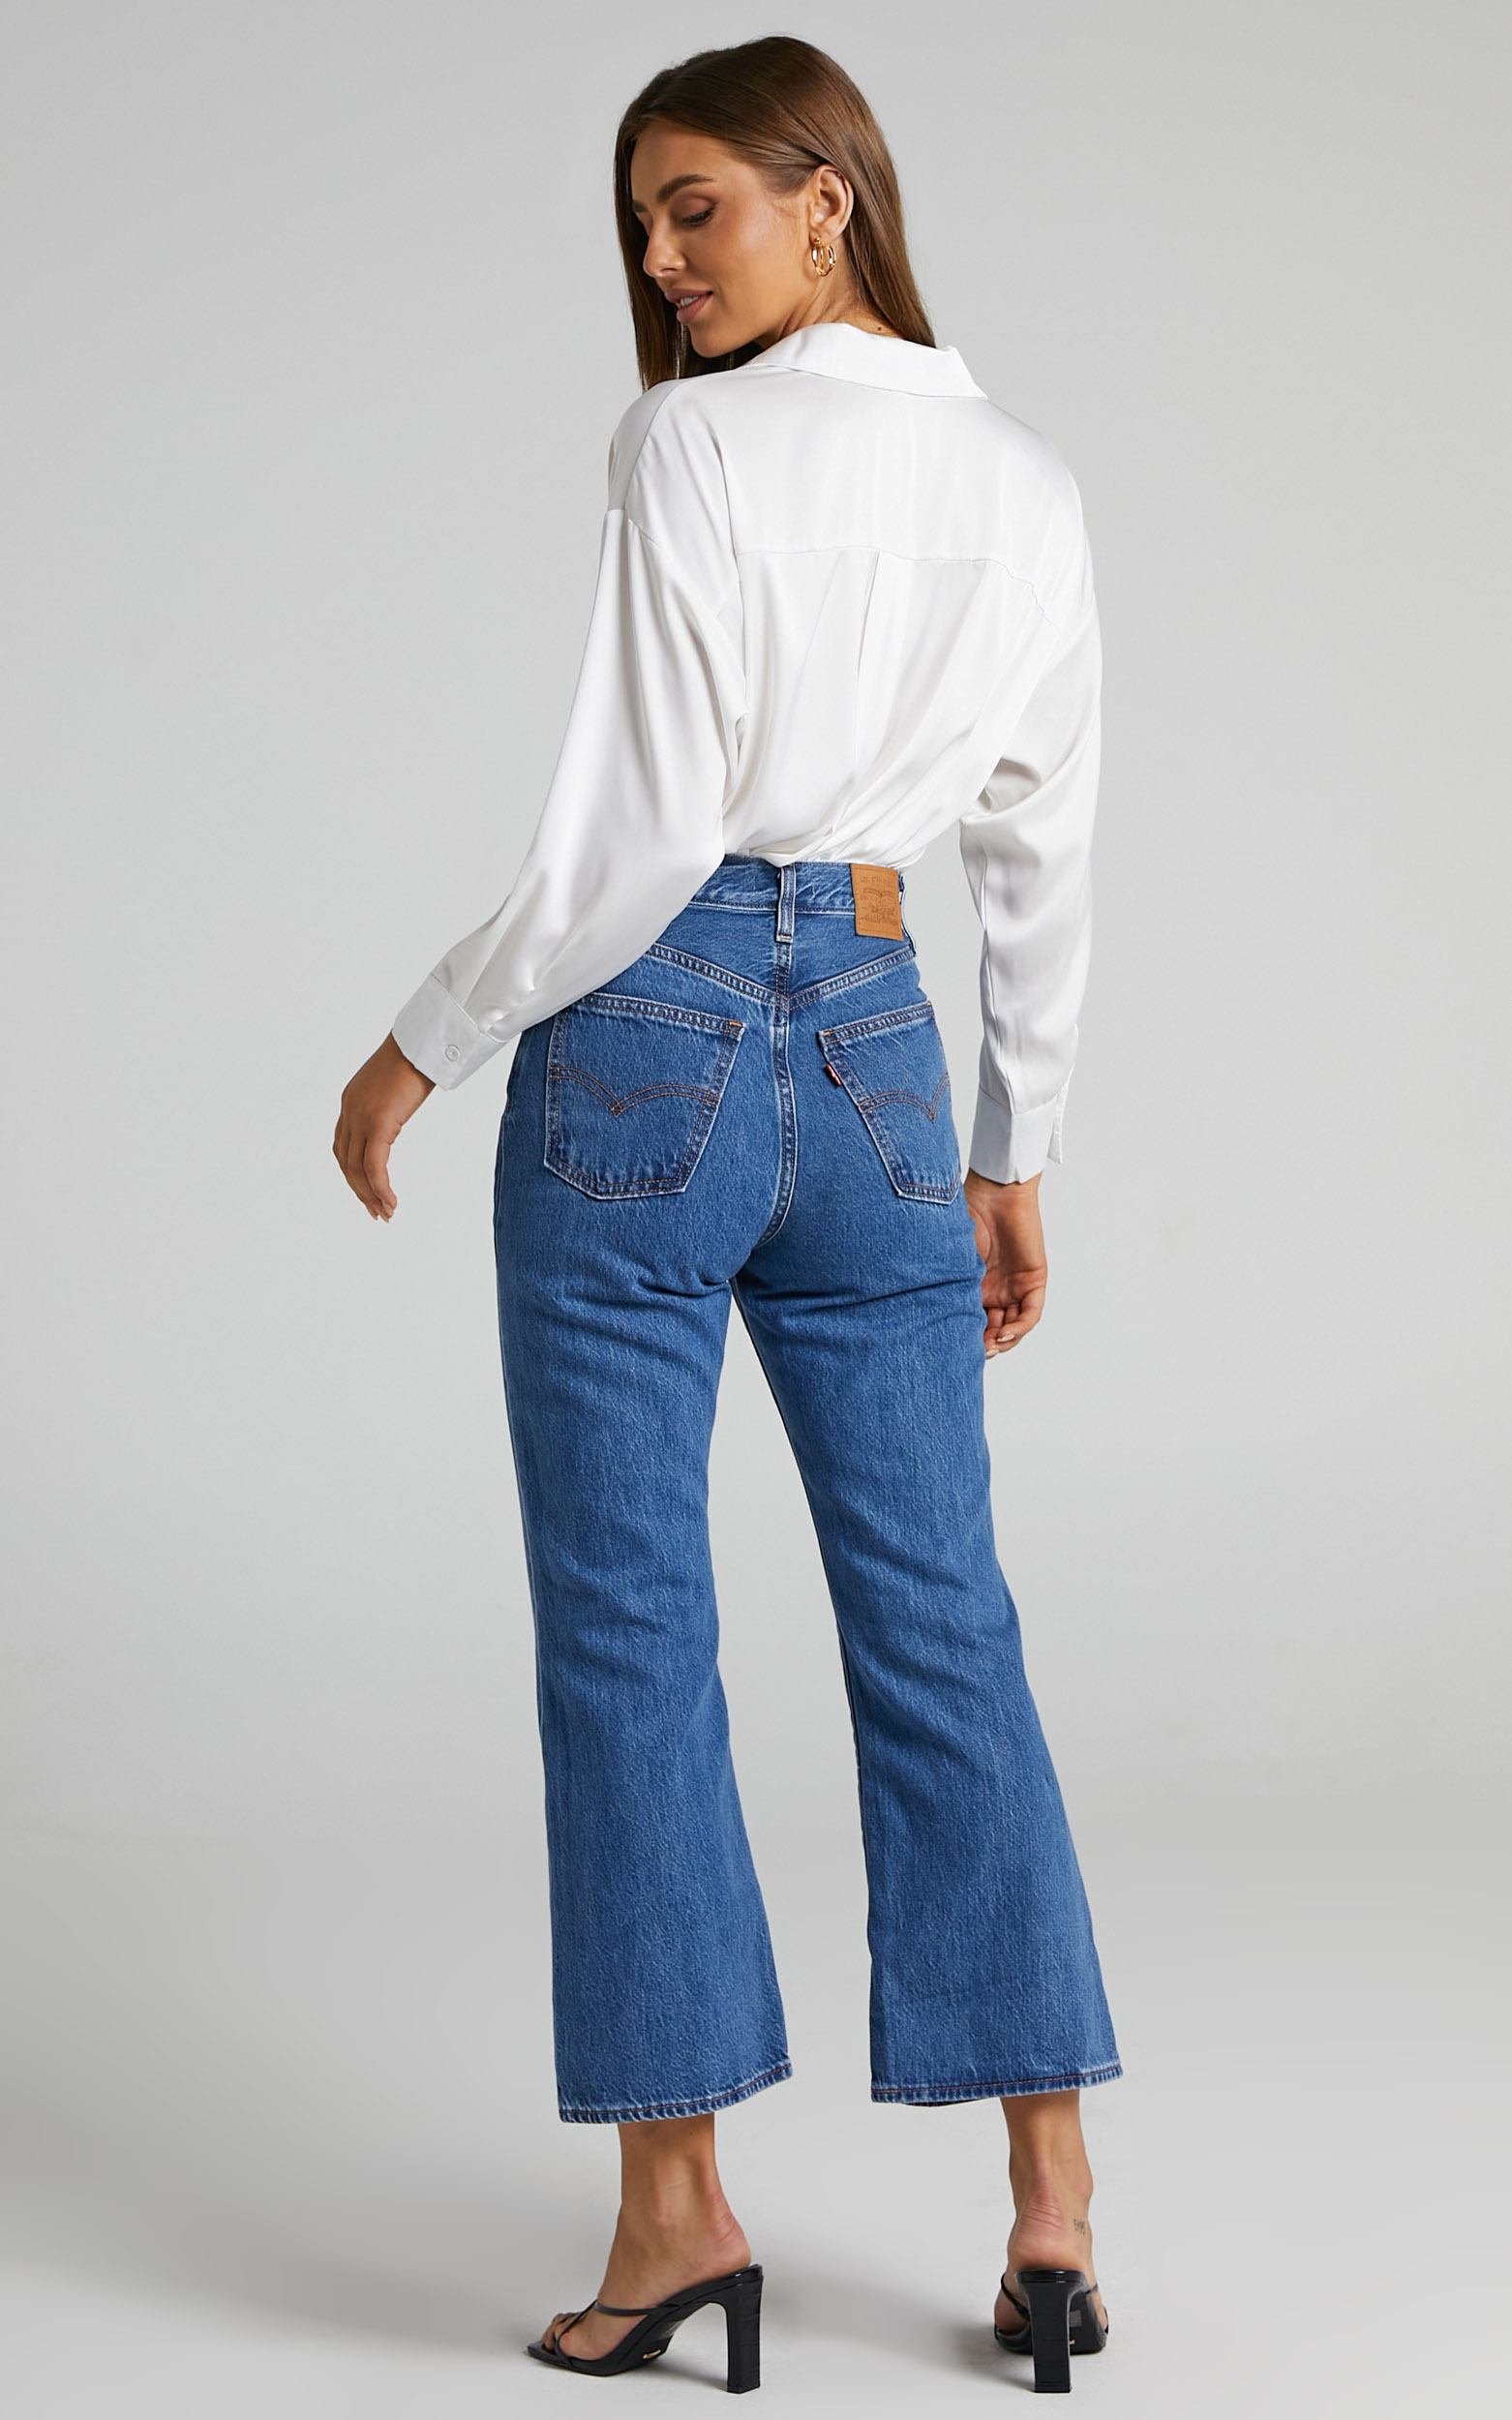 Levi's - Math Club Flare Jeans in Noe Numbers - 06, BLU1, hi-res image number null